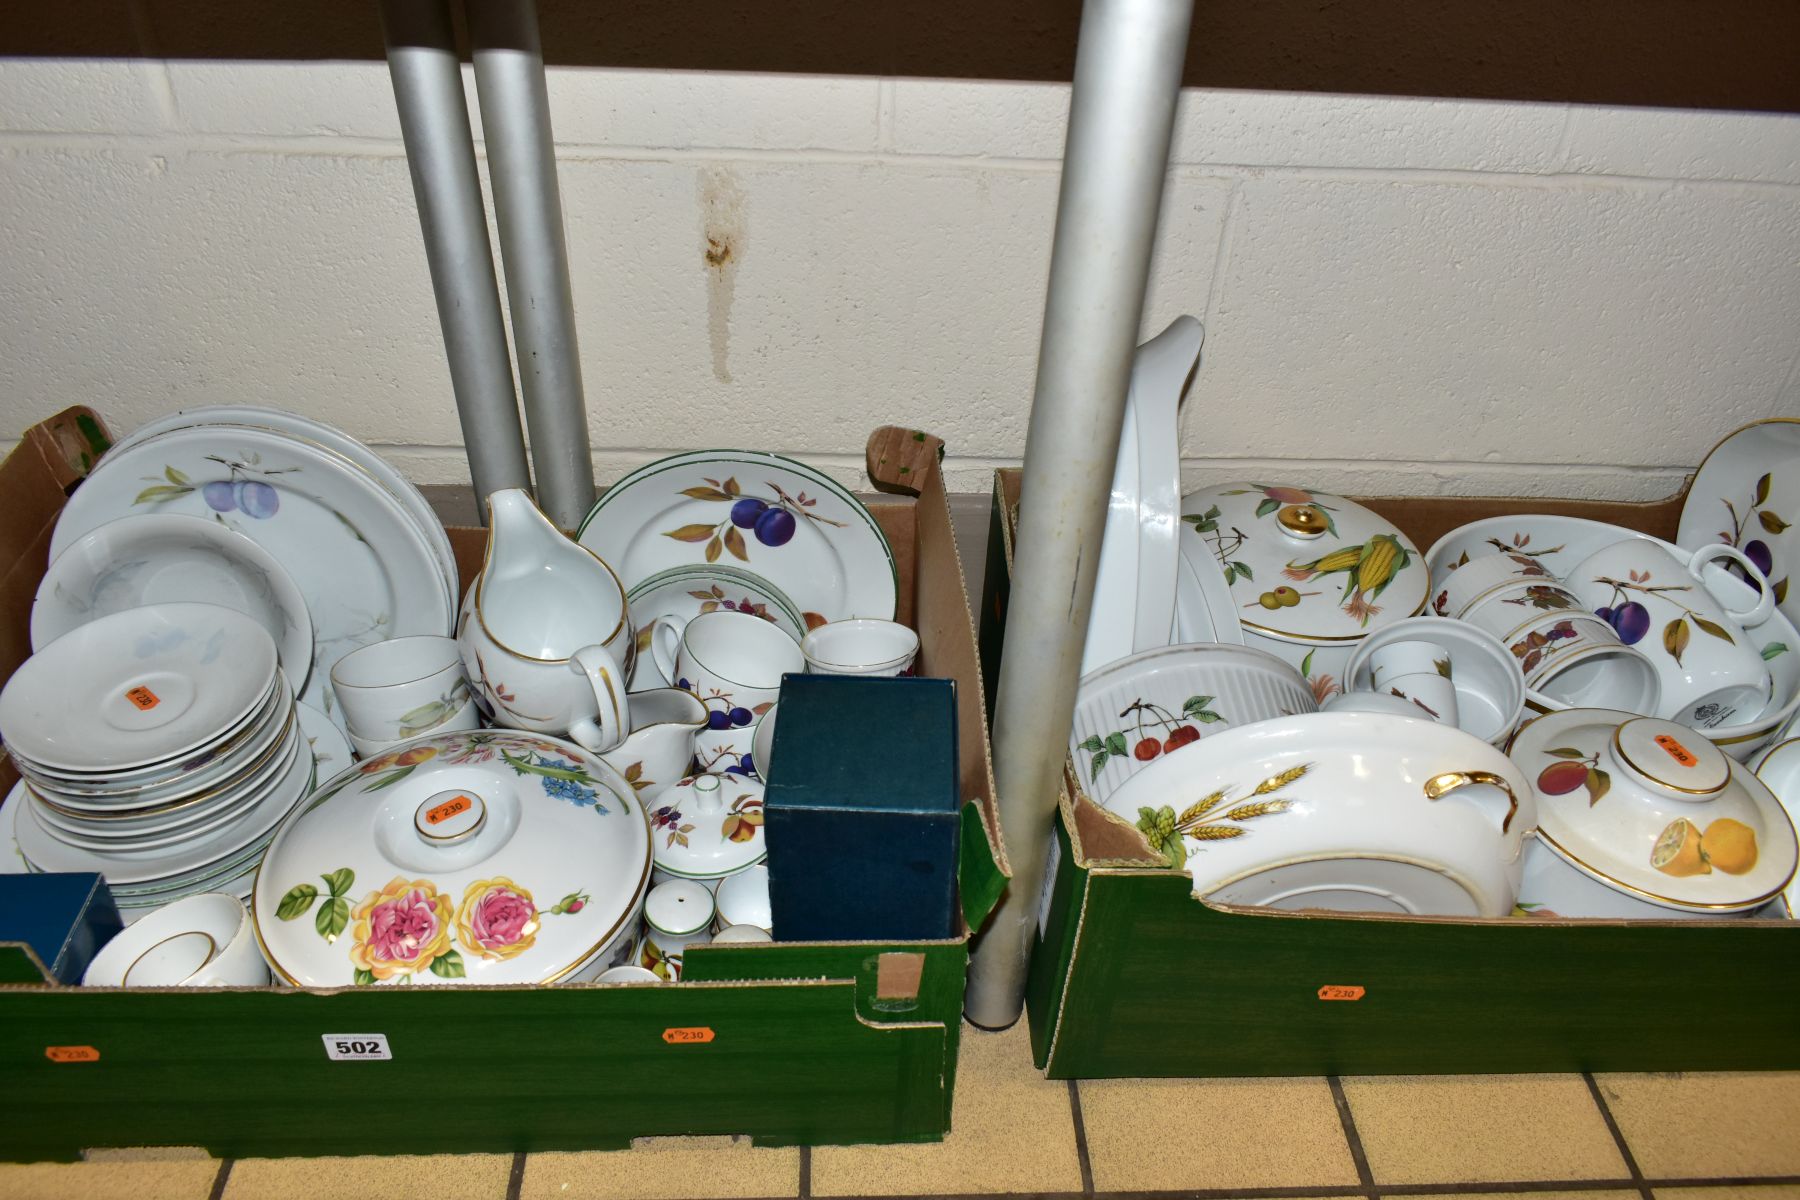 TWO BOXES OF ROYAL WORCESTER 'EVESHAM' OVEN TO TABLE WARES AND OTHER SIMILAR ITEMS, items include an